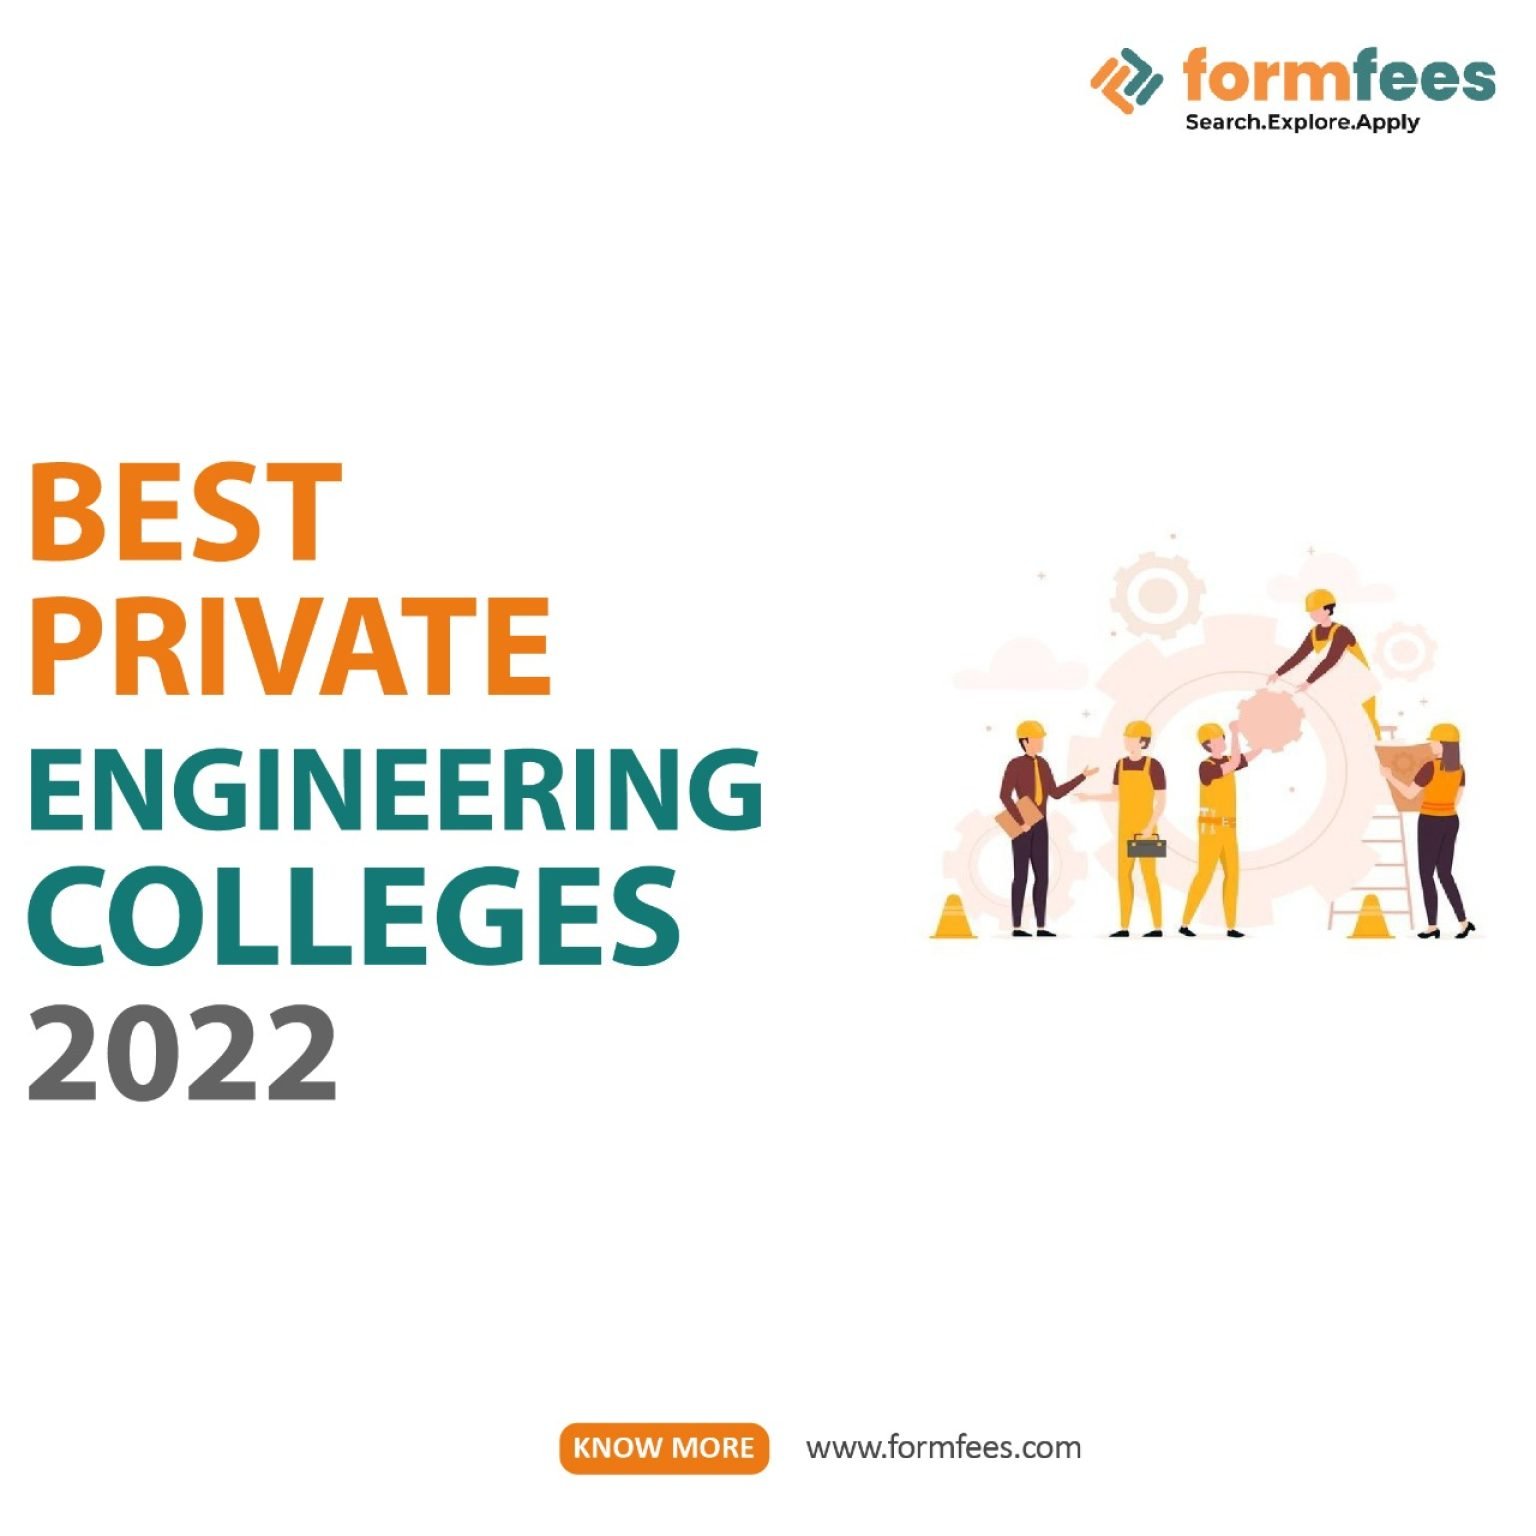 Best Private Engineering Colleges 2022 Formfees